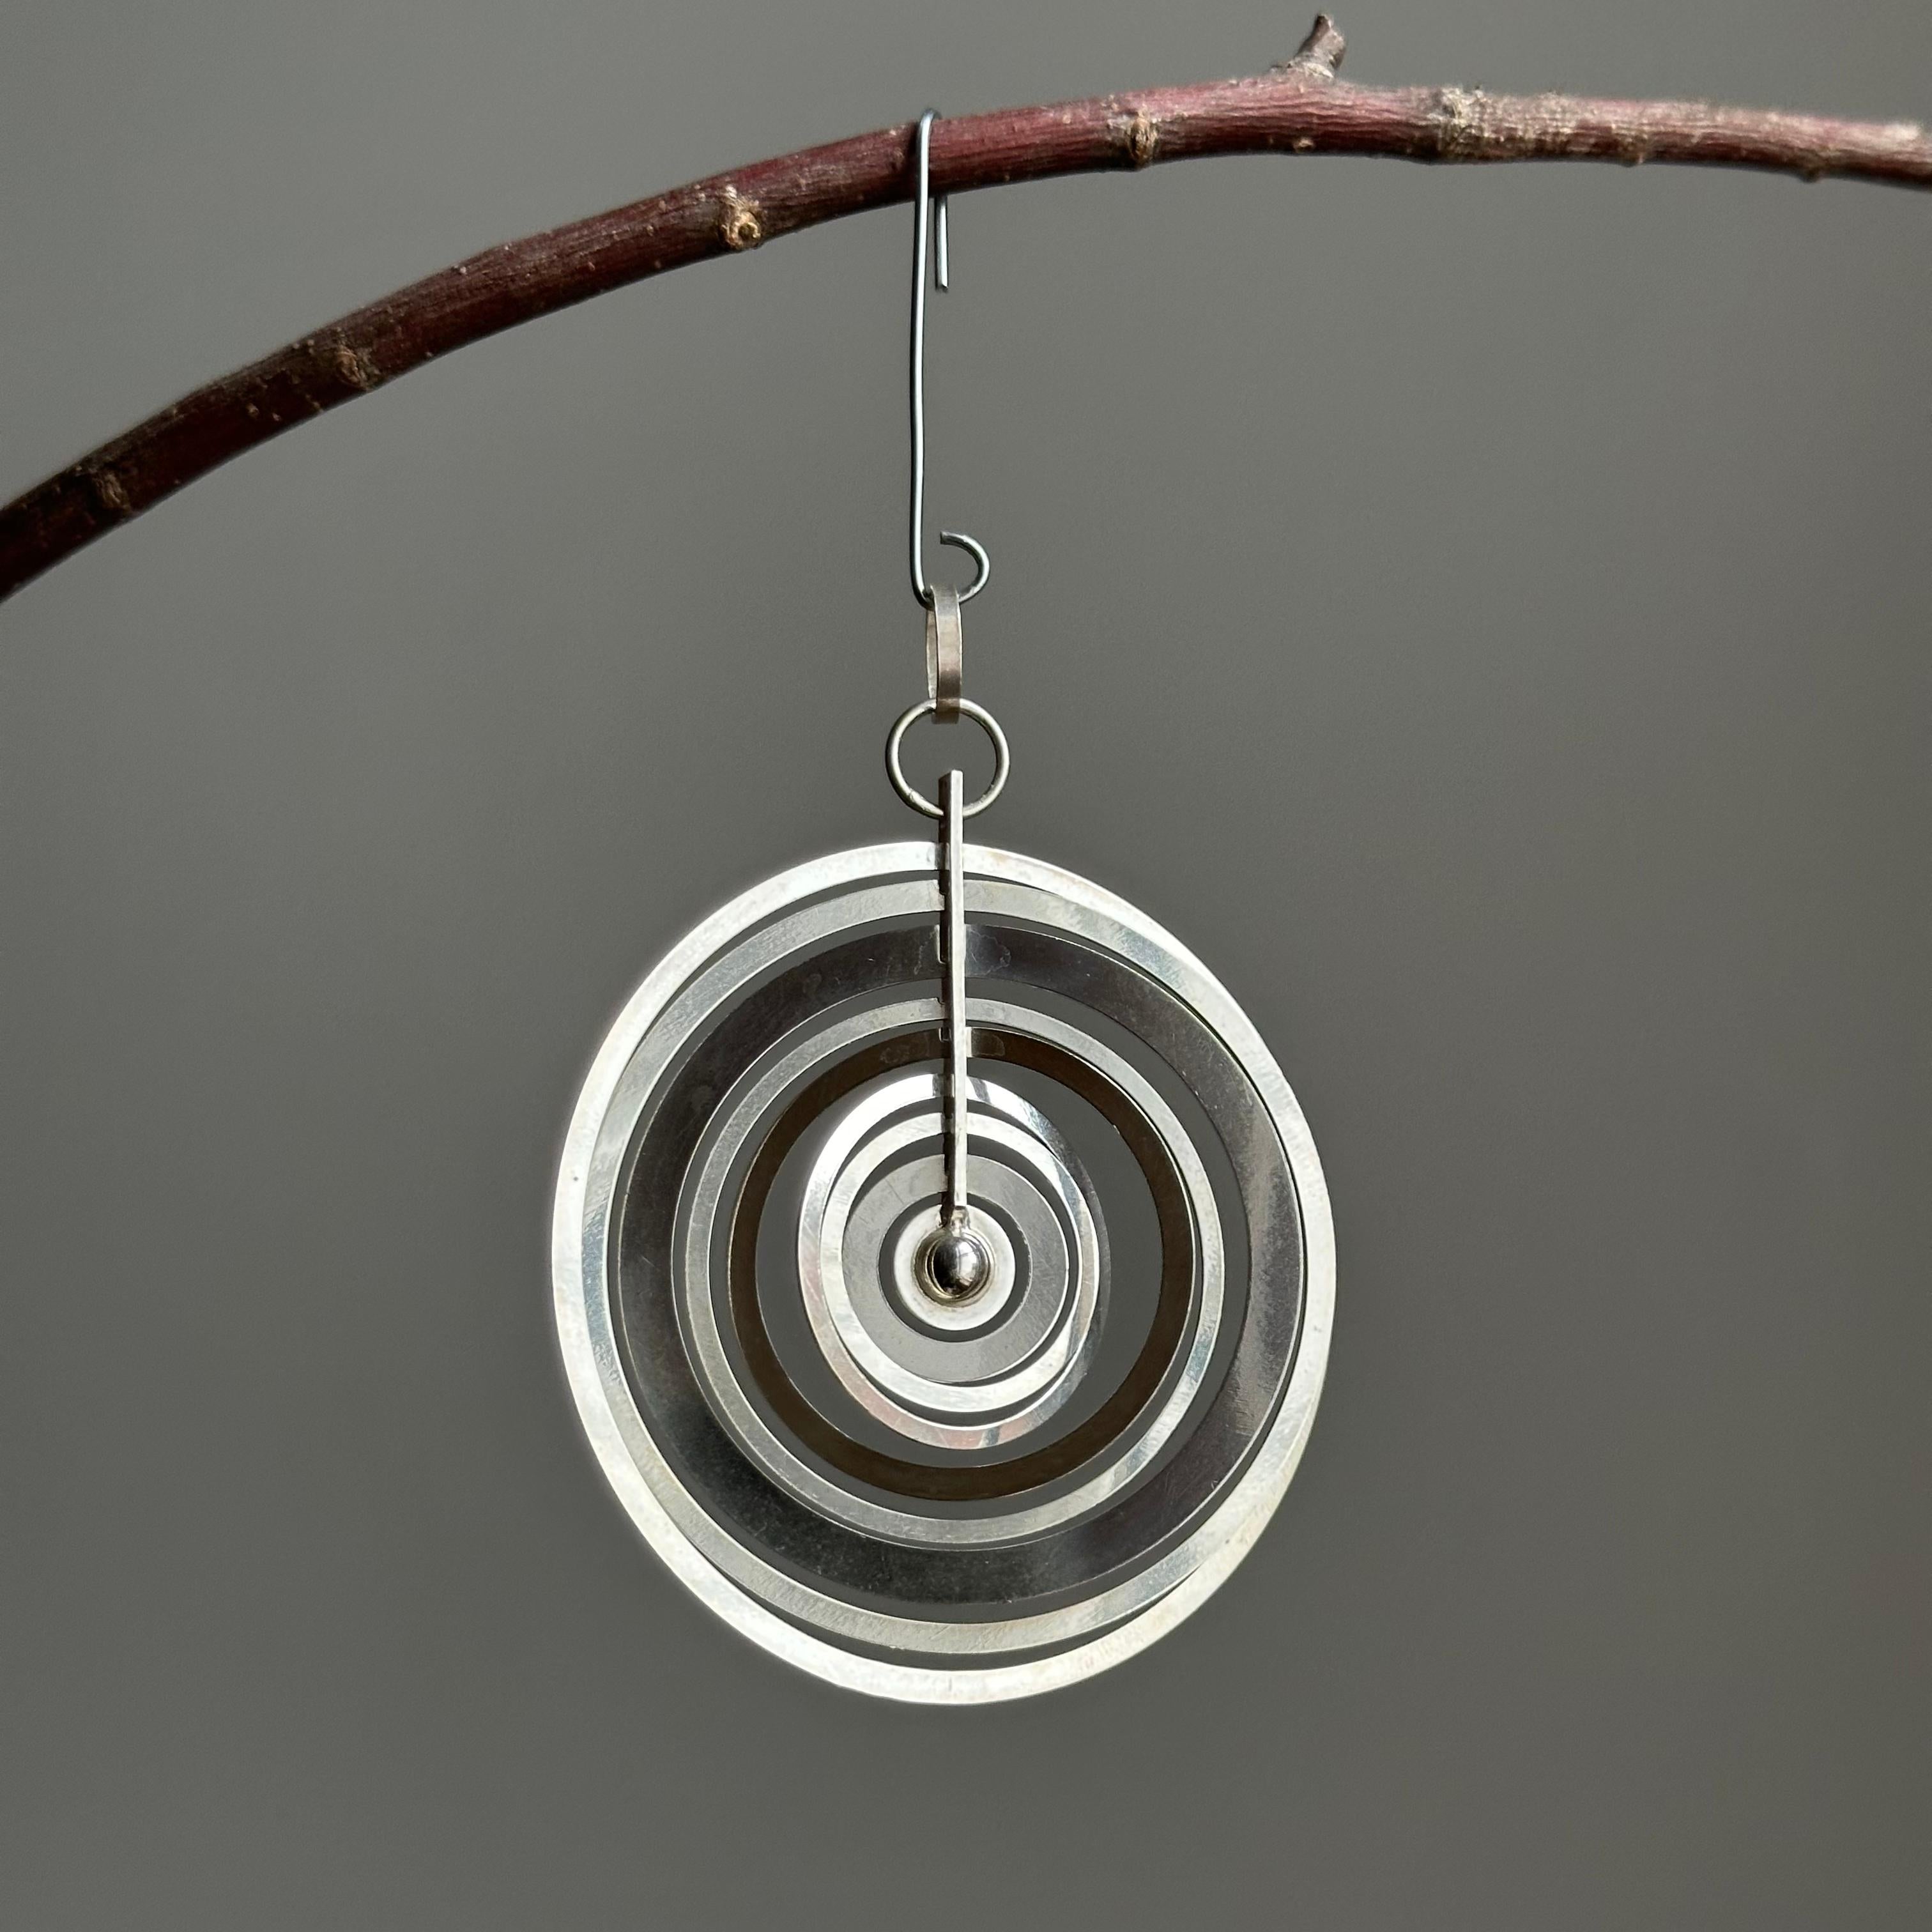 Hopeakuu (Finnish: silver moon) sterling pendant designed by Tapio Wirkkala, comprising nine concentric rings that move independently around a small orb at the end of a vertical support, creating a wearable work of mobile art. Hallmarked: NW (for N.